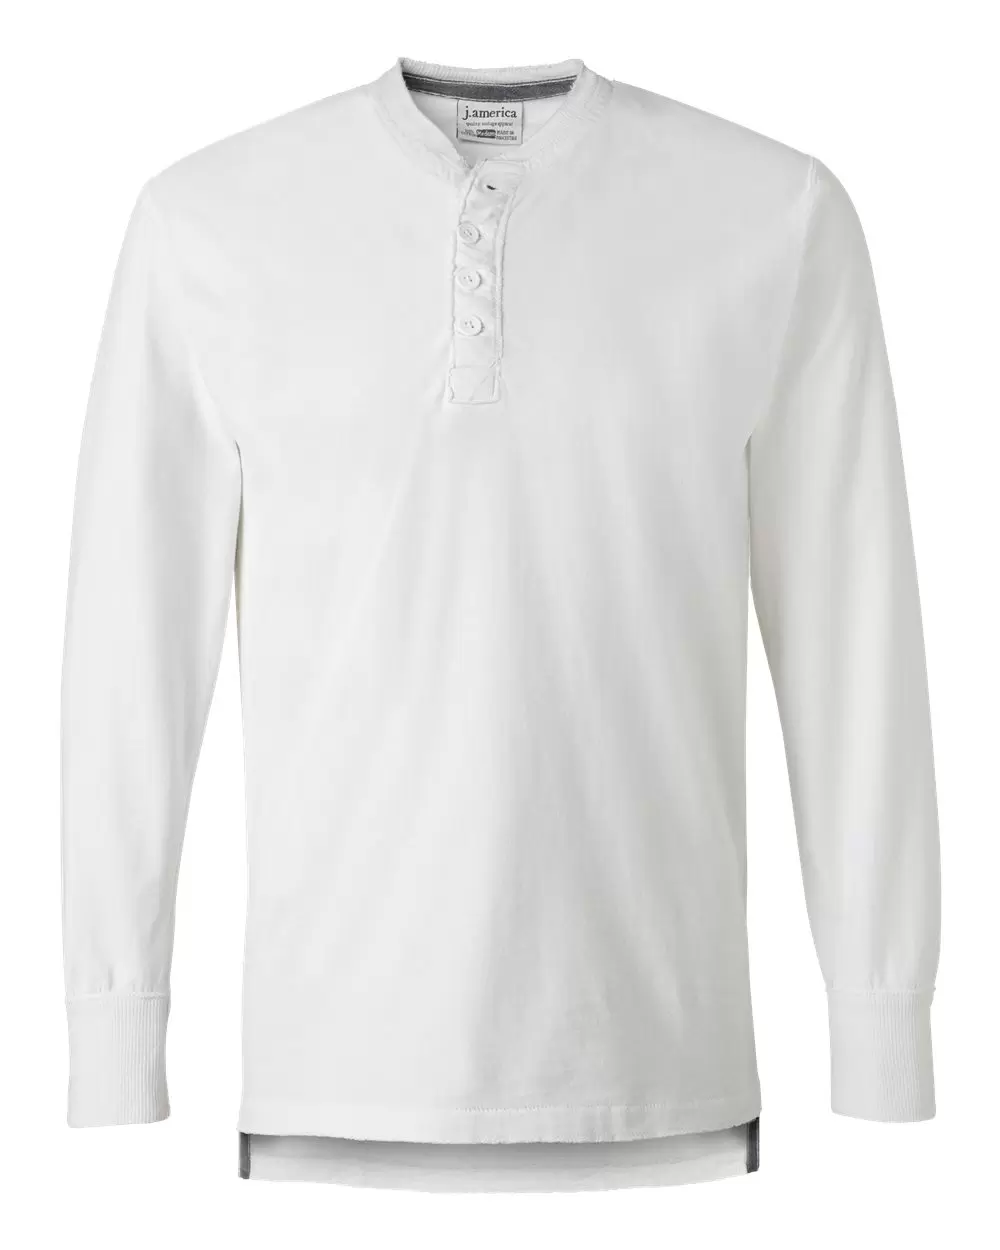 J. America - Vintage Brushed Jersey Henley - 8244 - From $9.28